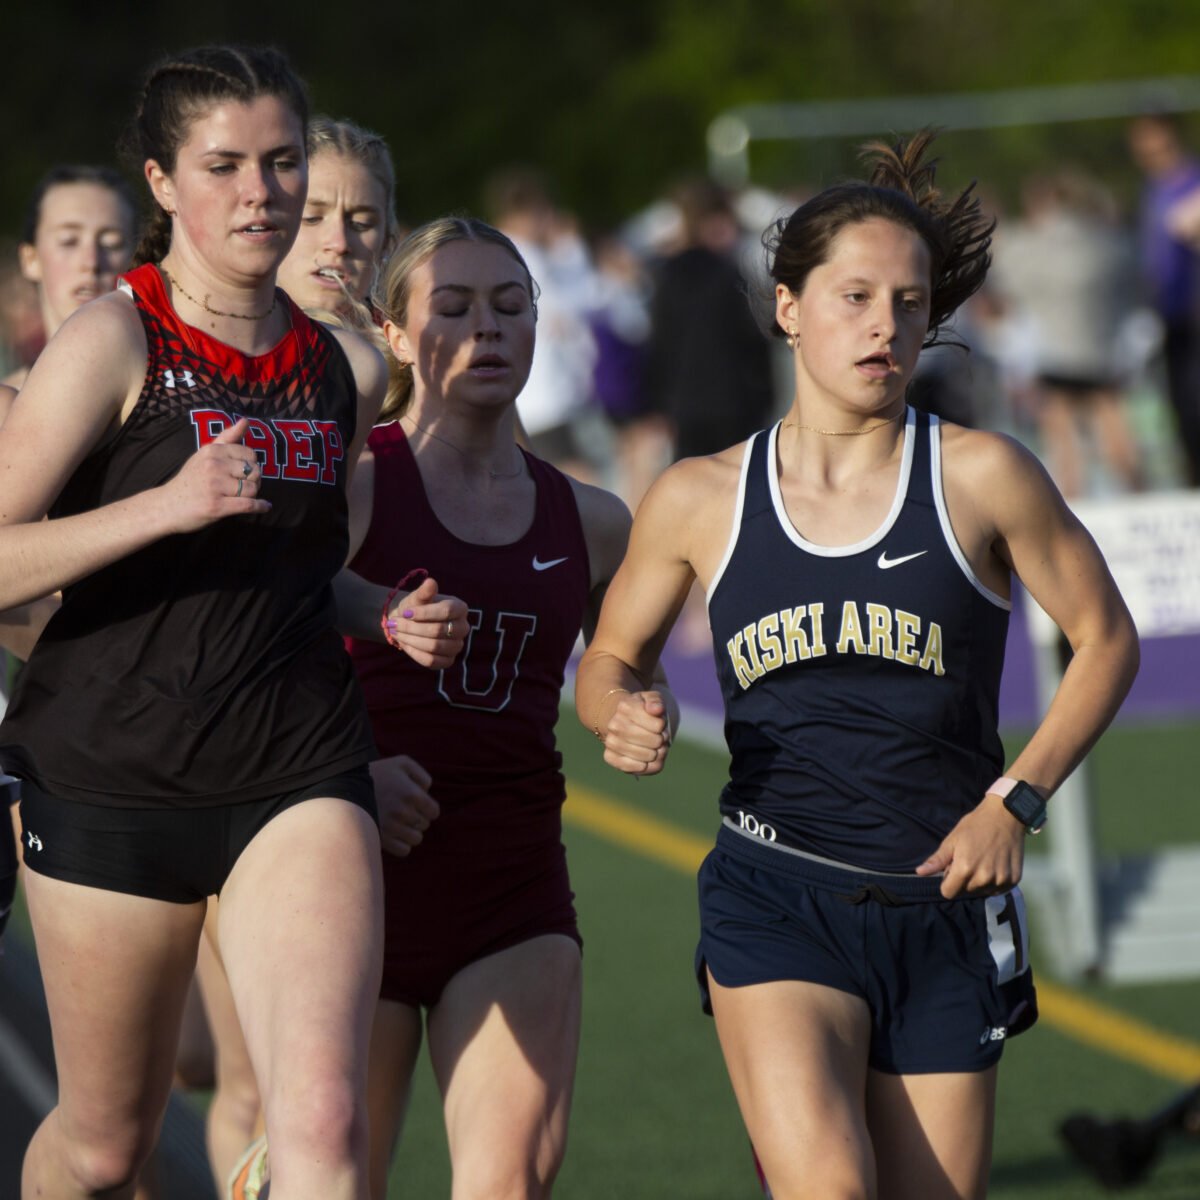 A WPIAL champ in track and swimming, Kiski Area’s Eliza Miller aims for big senior season before joining Duquesne’s women’s triathlon team